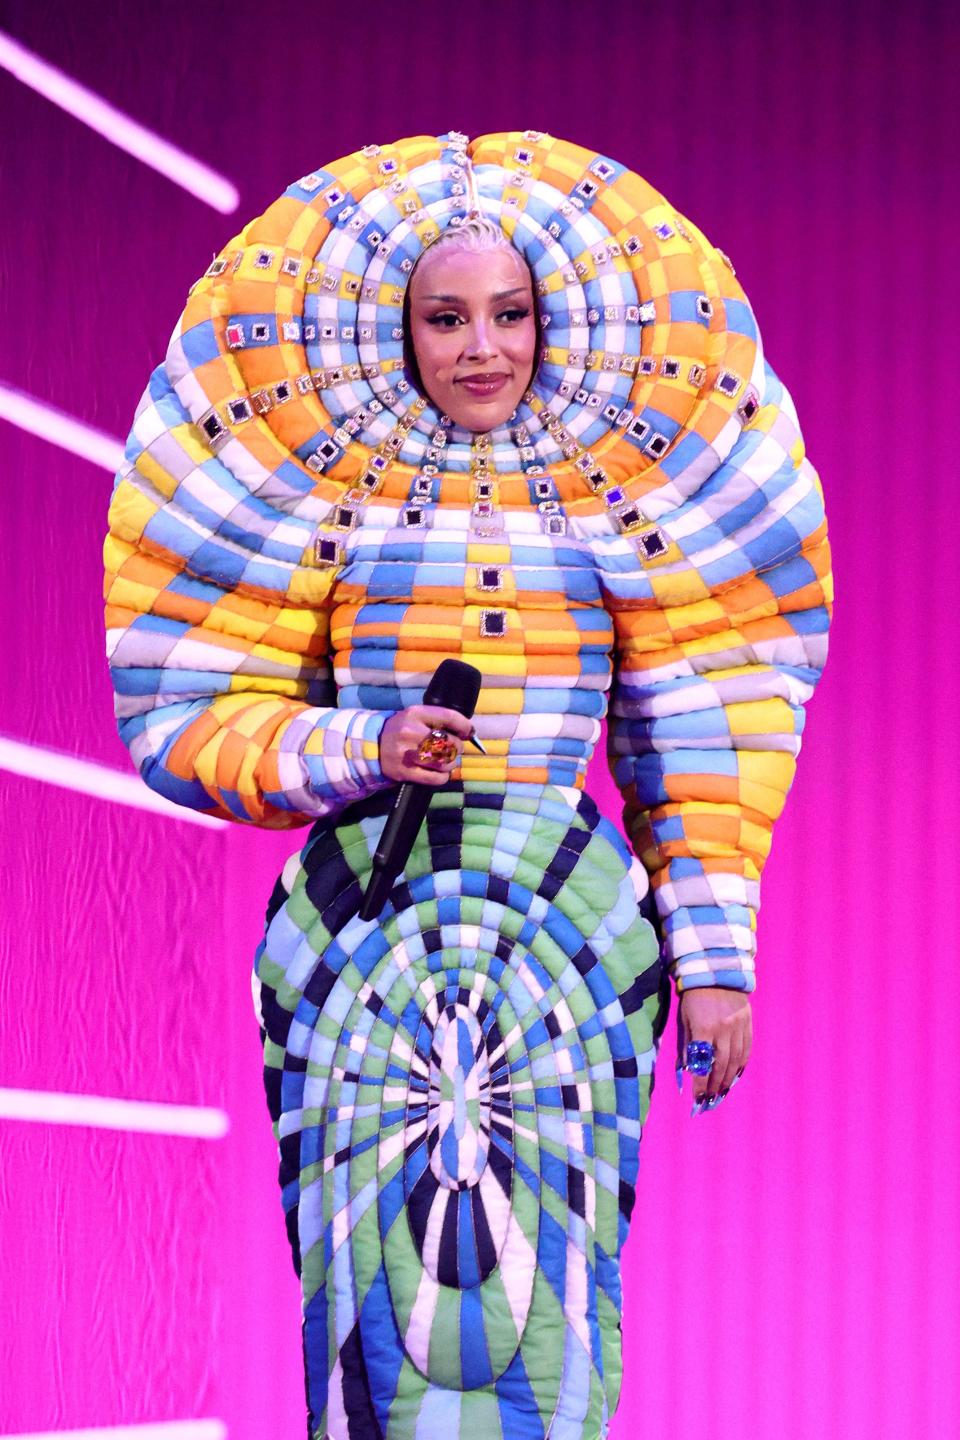 Doja Cat onstage at the 2021 MTV Video Music Awards in the Brooklyn, New York City.